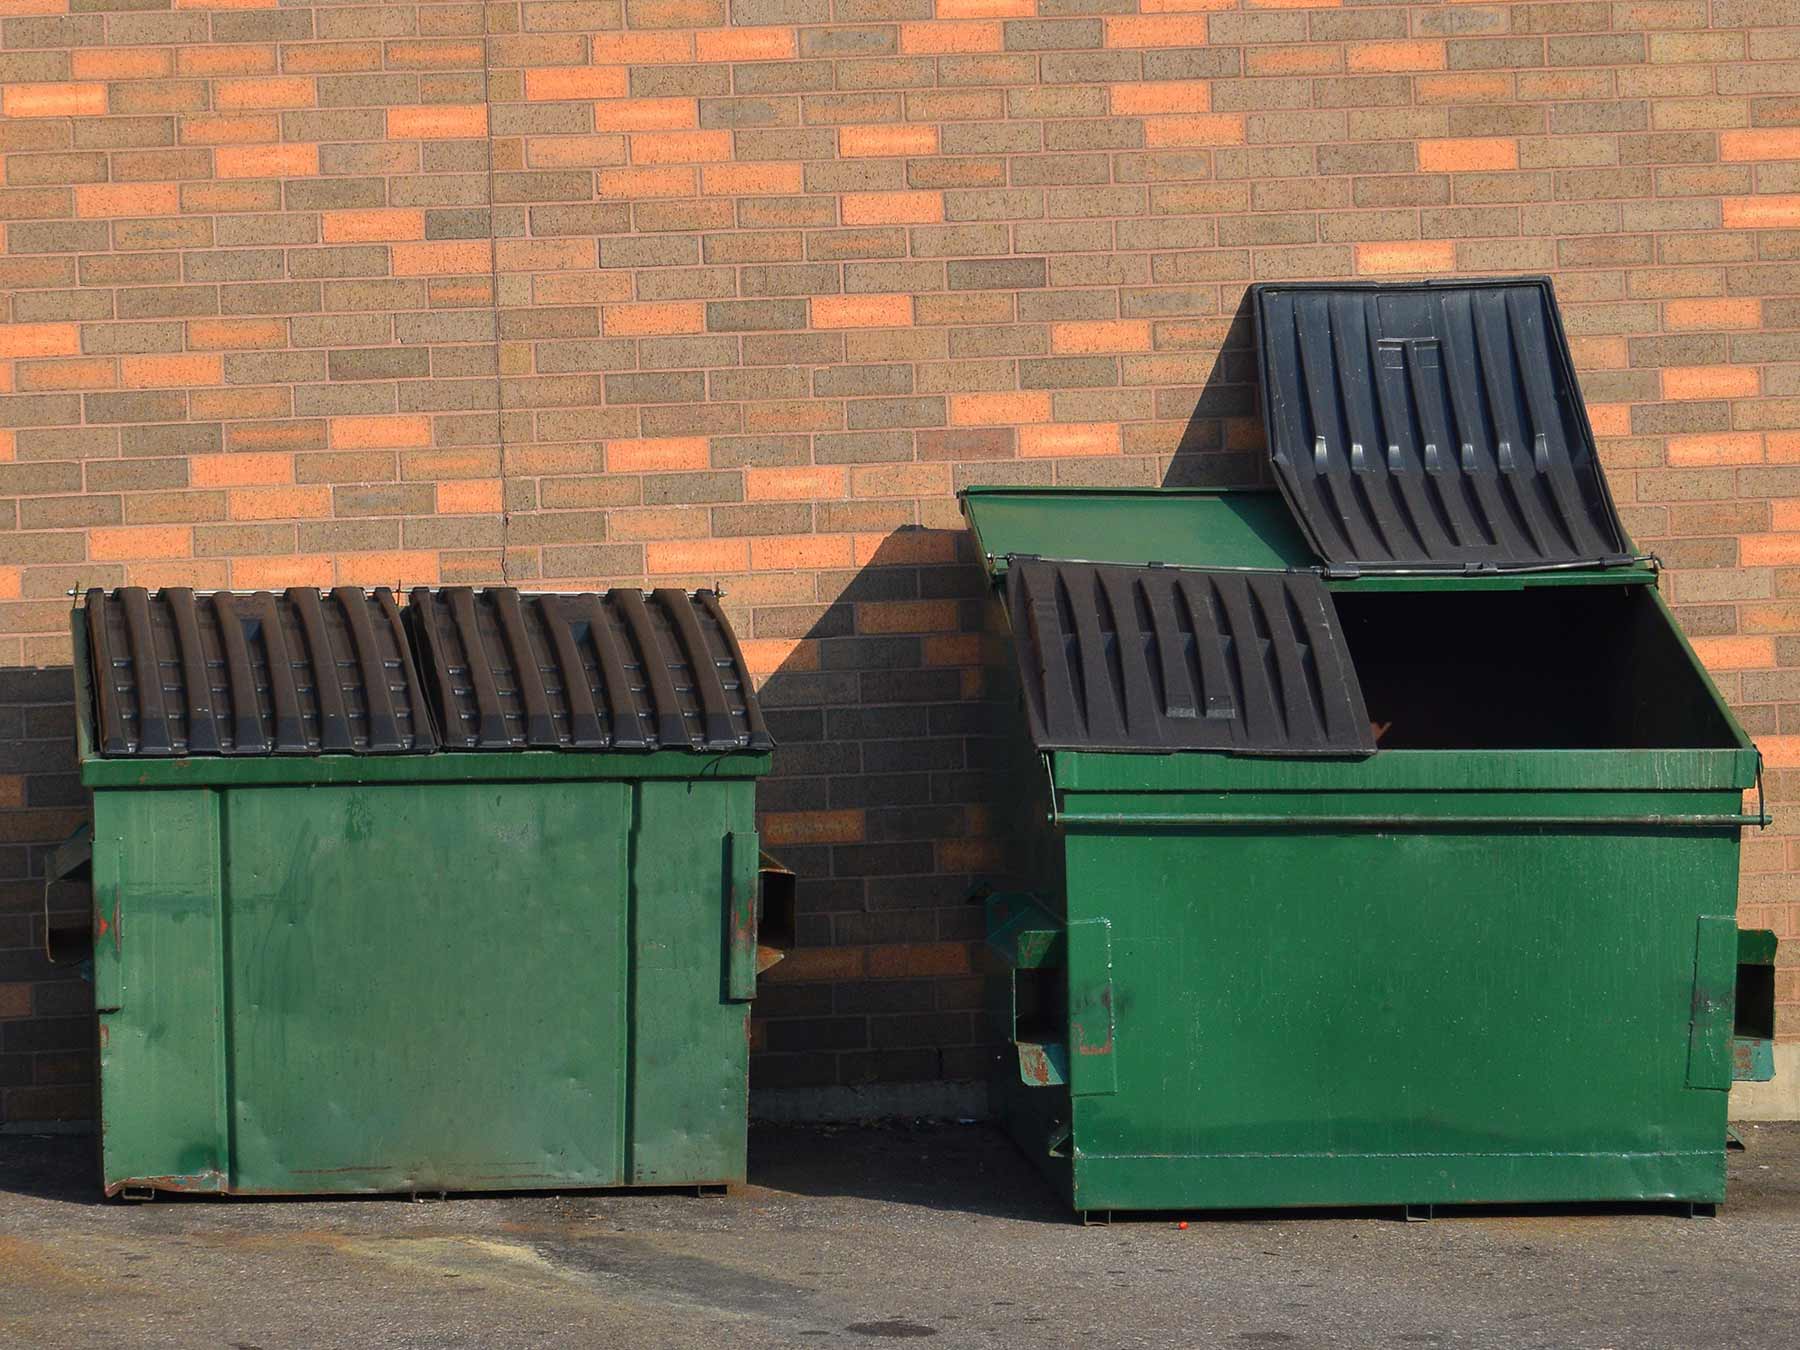 Benefits of renting a small dumpster